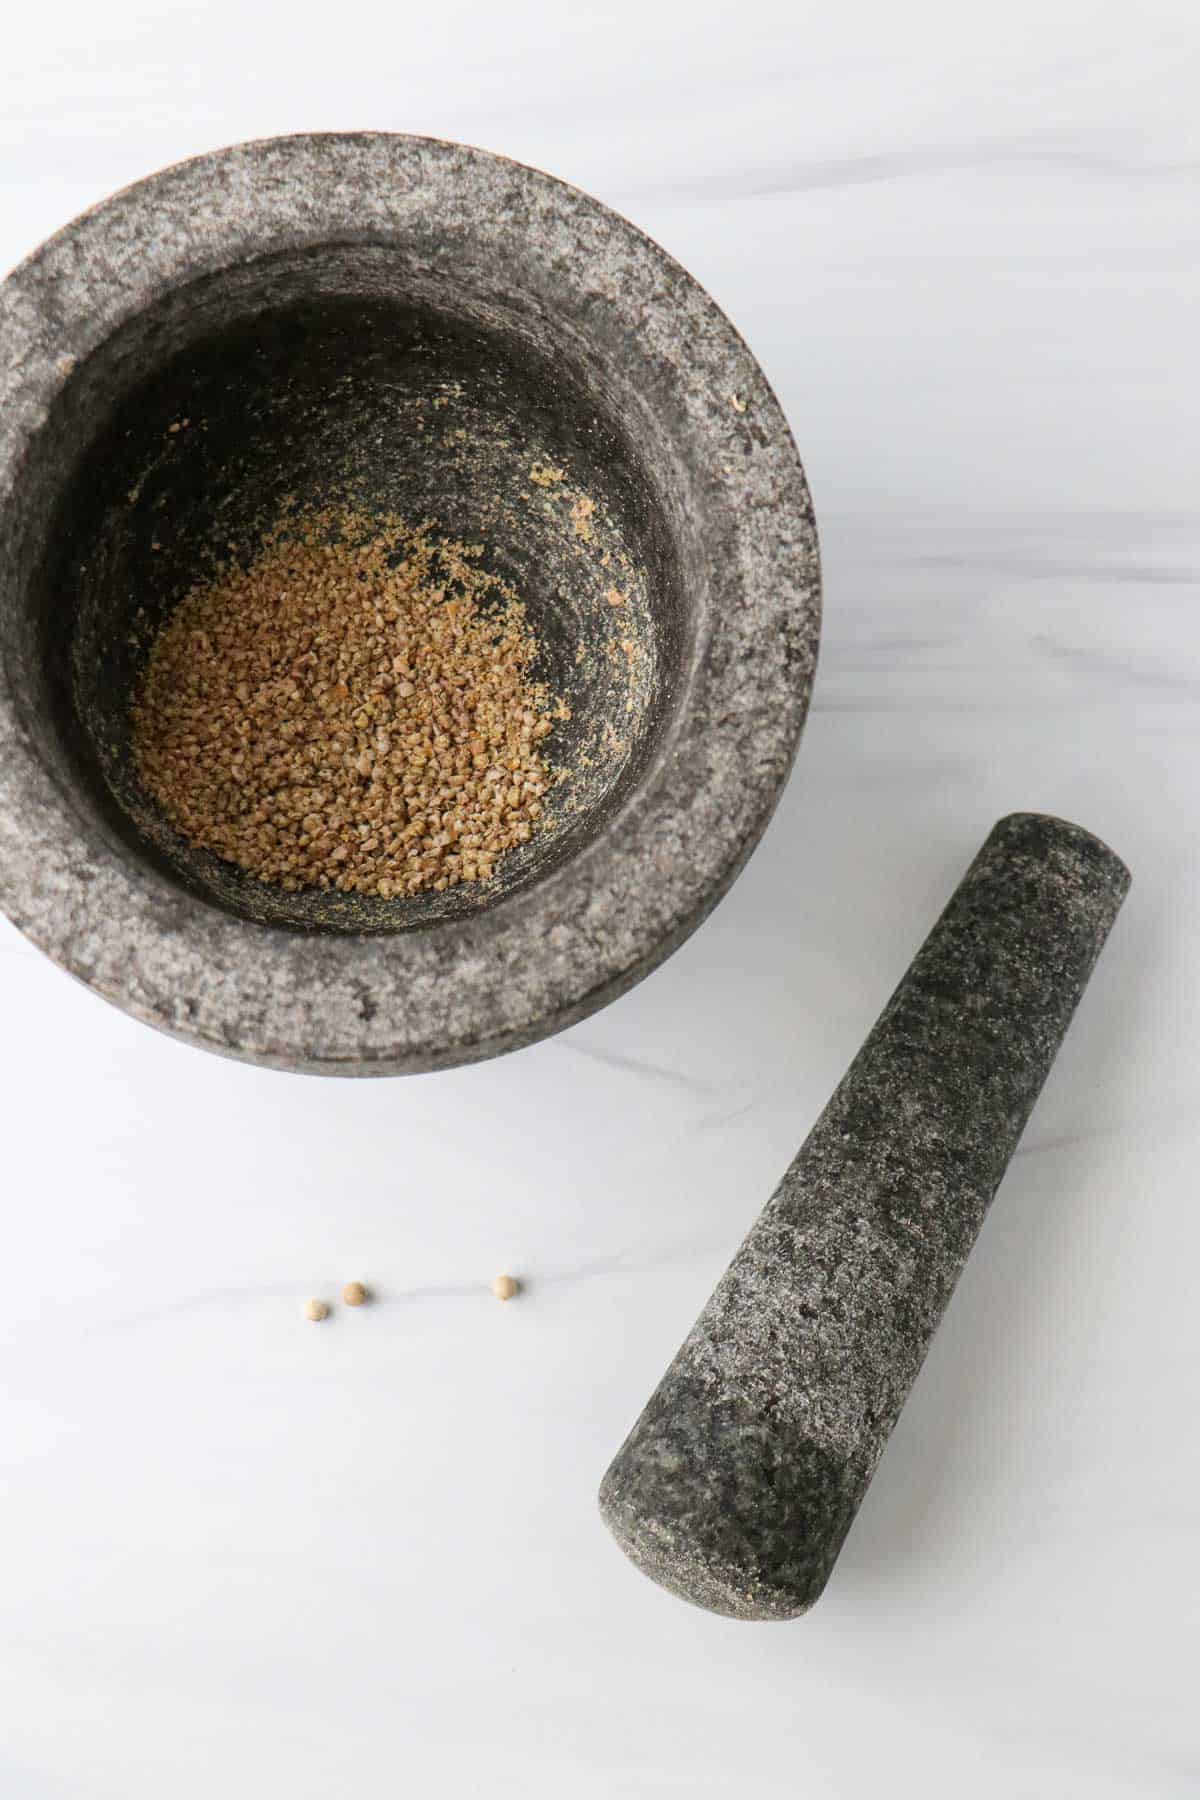 Ground white peppercorns in a mortar next to a pestle.